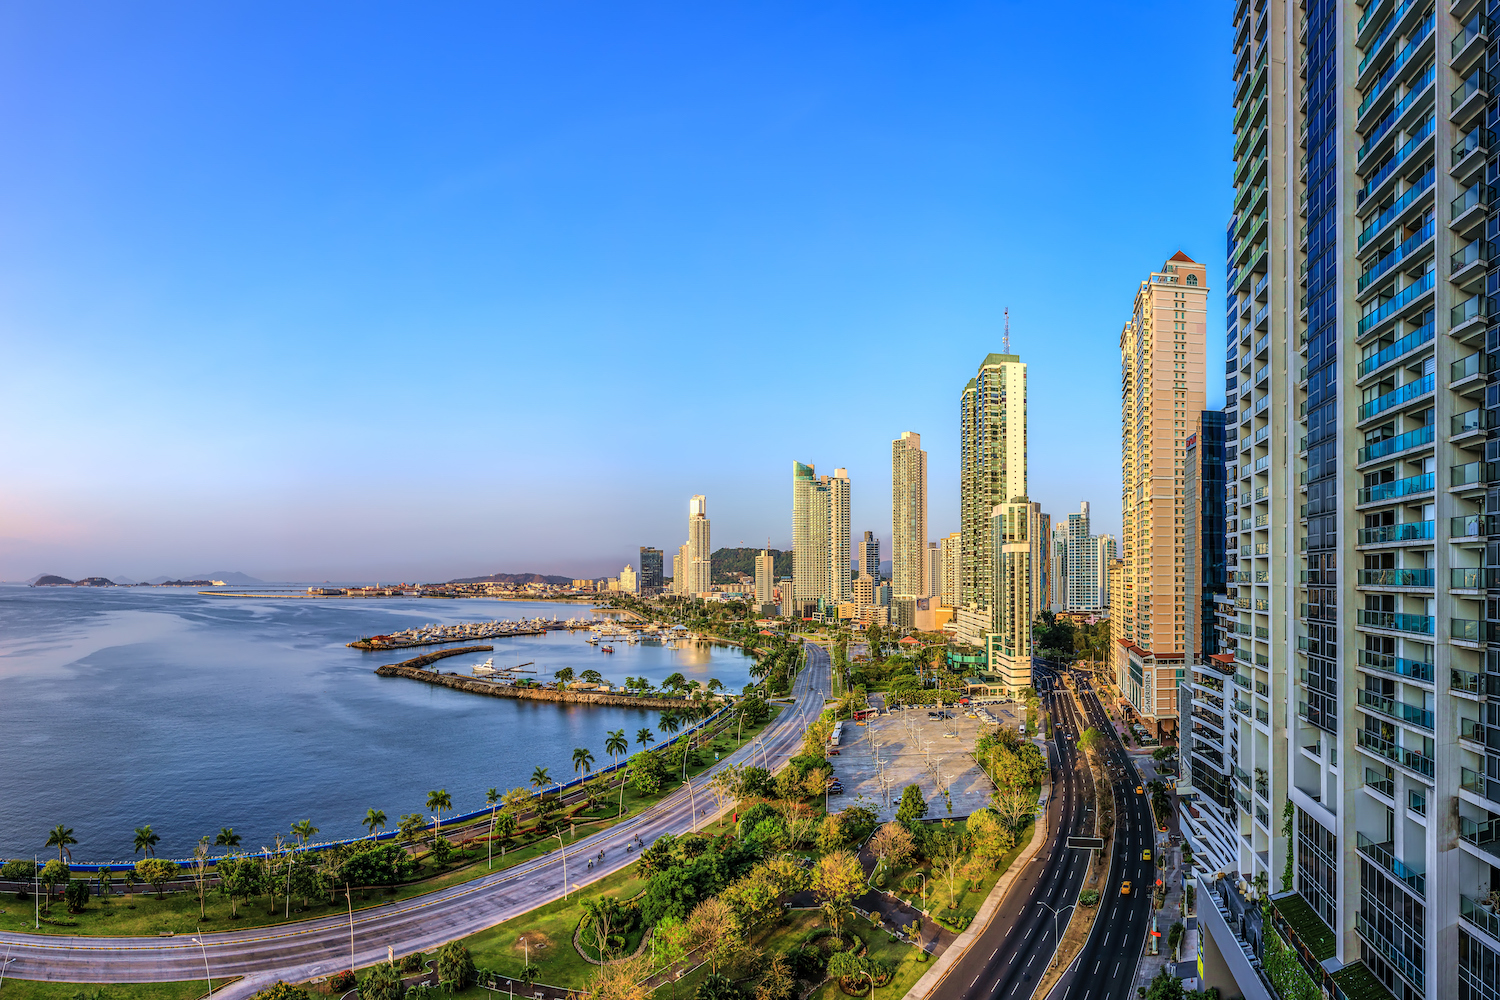 Panoramic high level view of Panama City, high buildings against blue sky, in front blue sea.